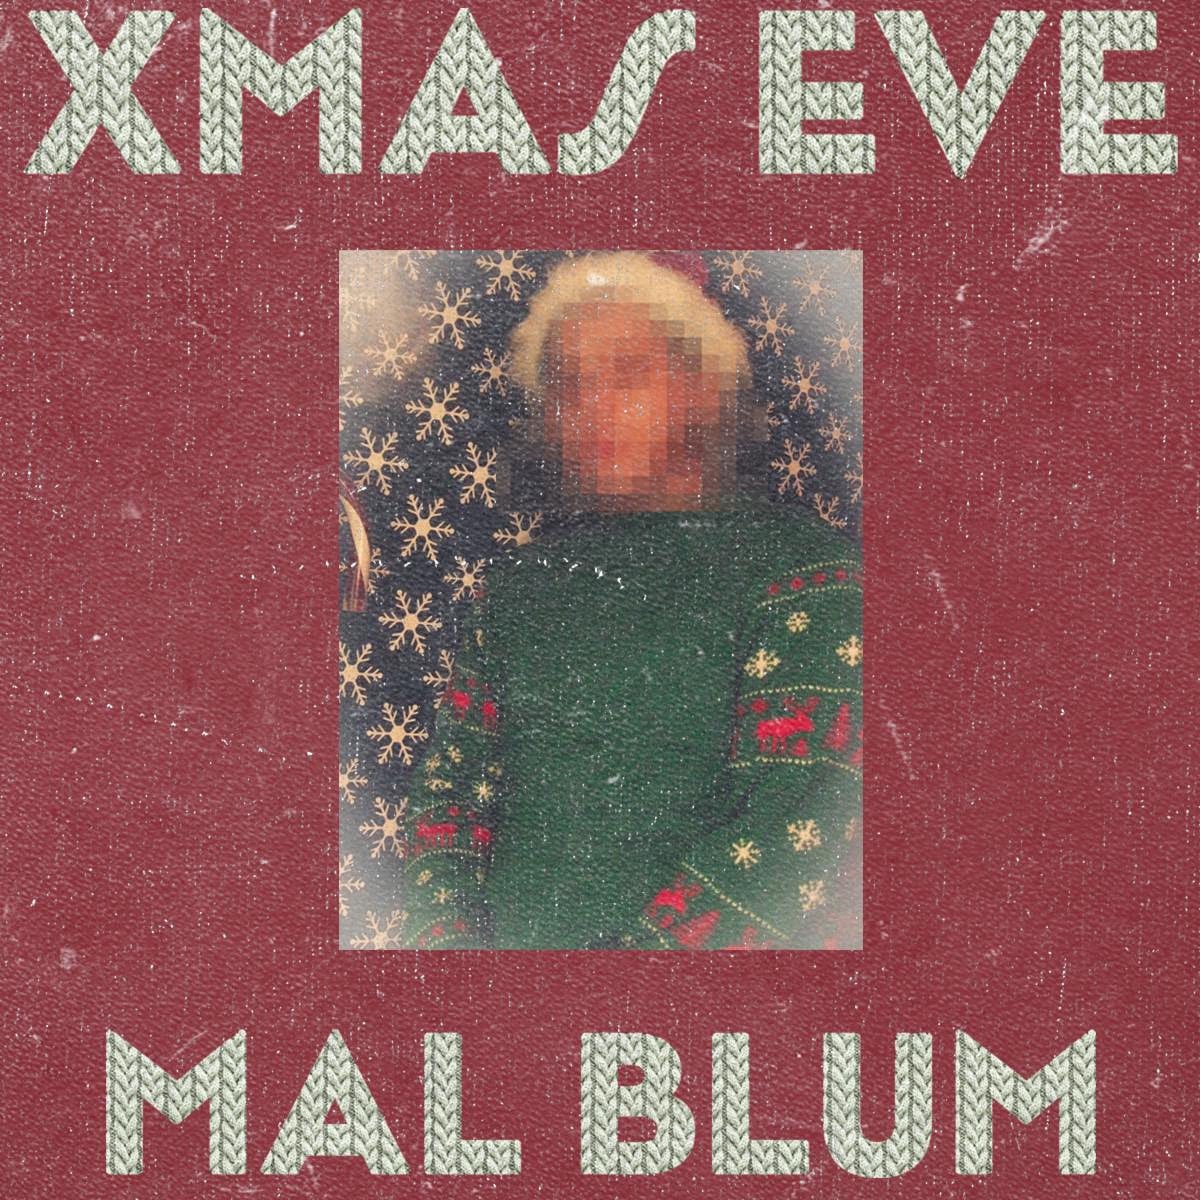 SURPRISE: new (old?) single on Fri…Some of you may recall a song I wrote when I was 16 called Xmas Eve... A film asked to use it so I recorded a version for you. More on this later, but you can pre-save it here: ffm.to/rkbnvl7